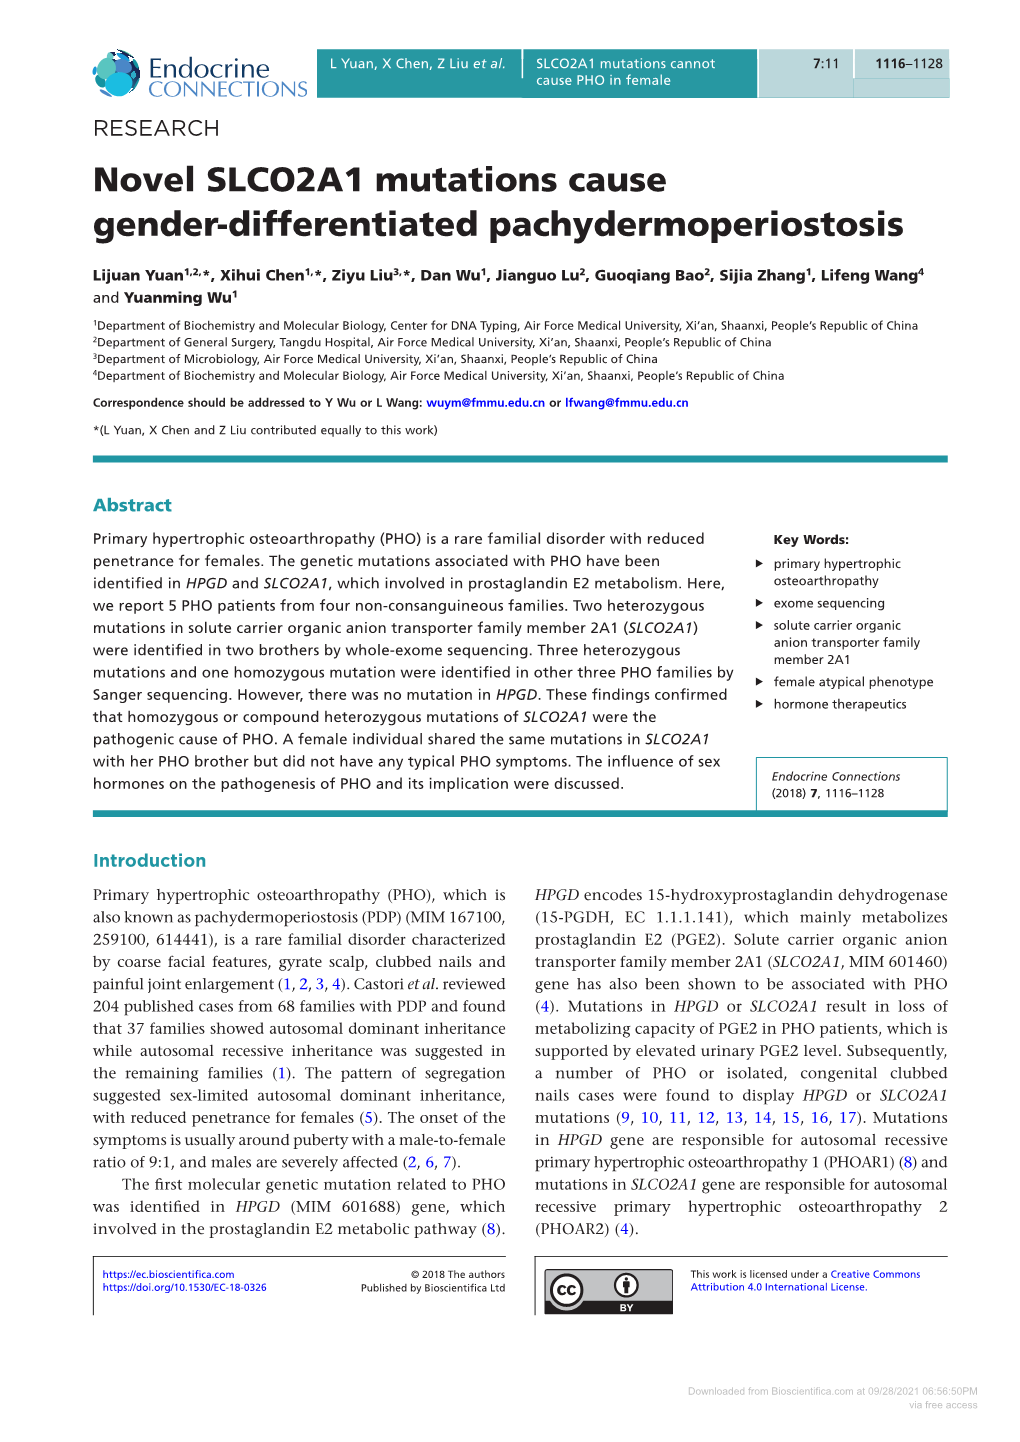 Novel SLCO2A1 Mutations Cause Gender-Differentiated Pachydermoperiostosis